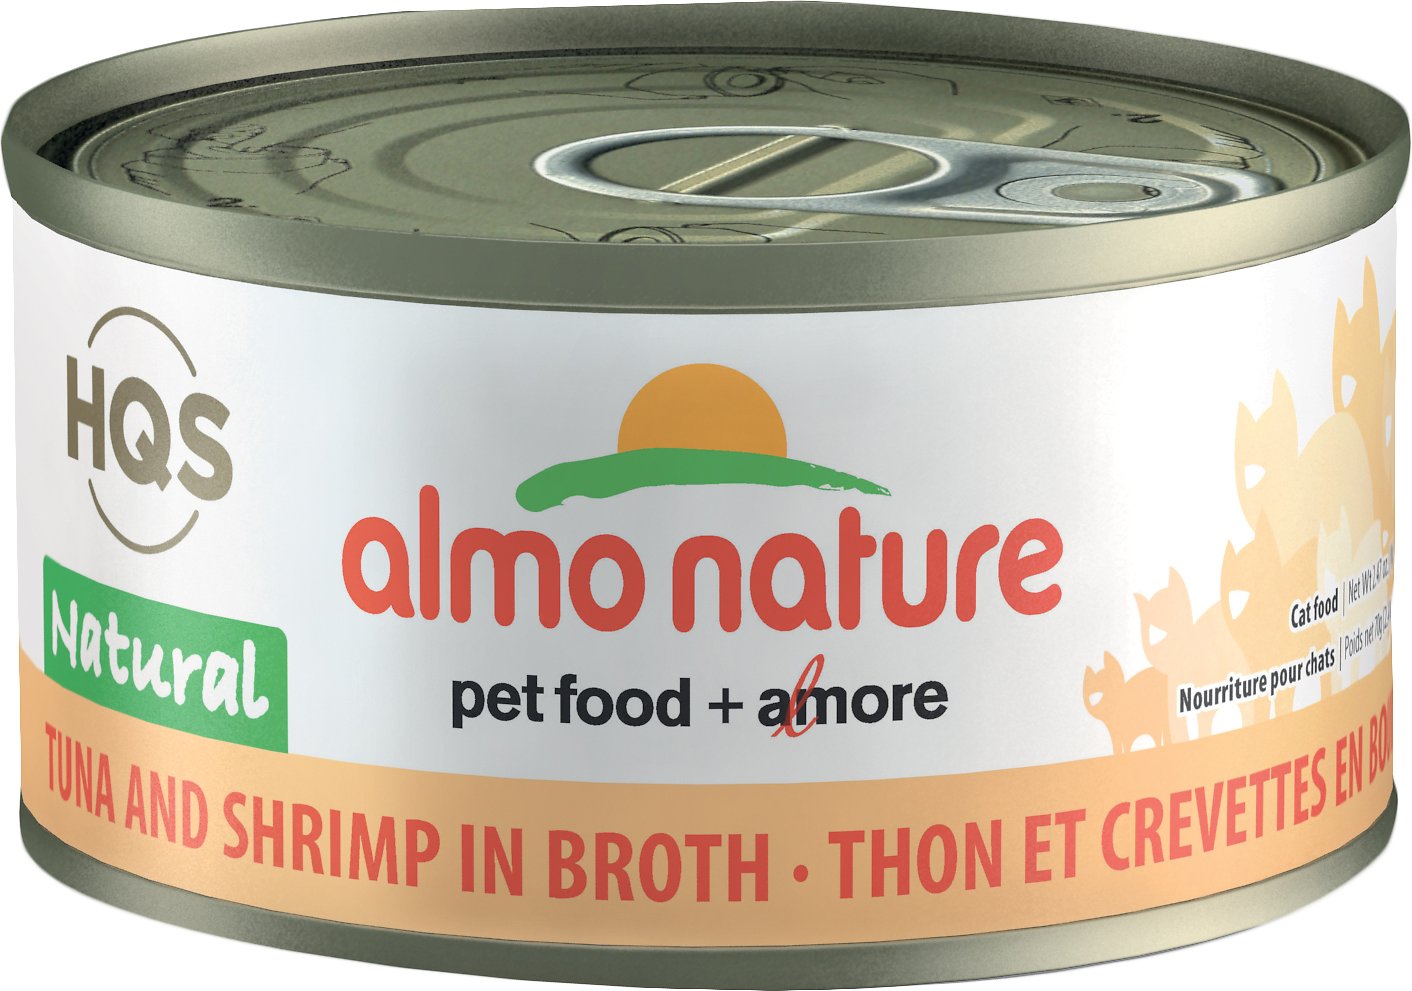 Almo Nature Tuna & Shrimp in Broth Canned Cat Food (70g/2.47oz)